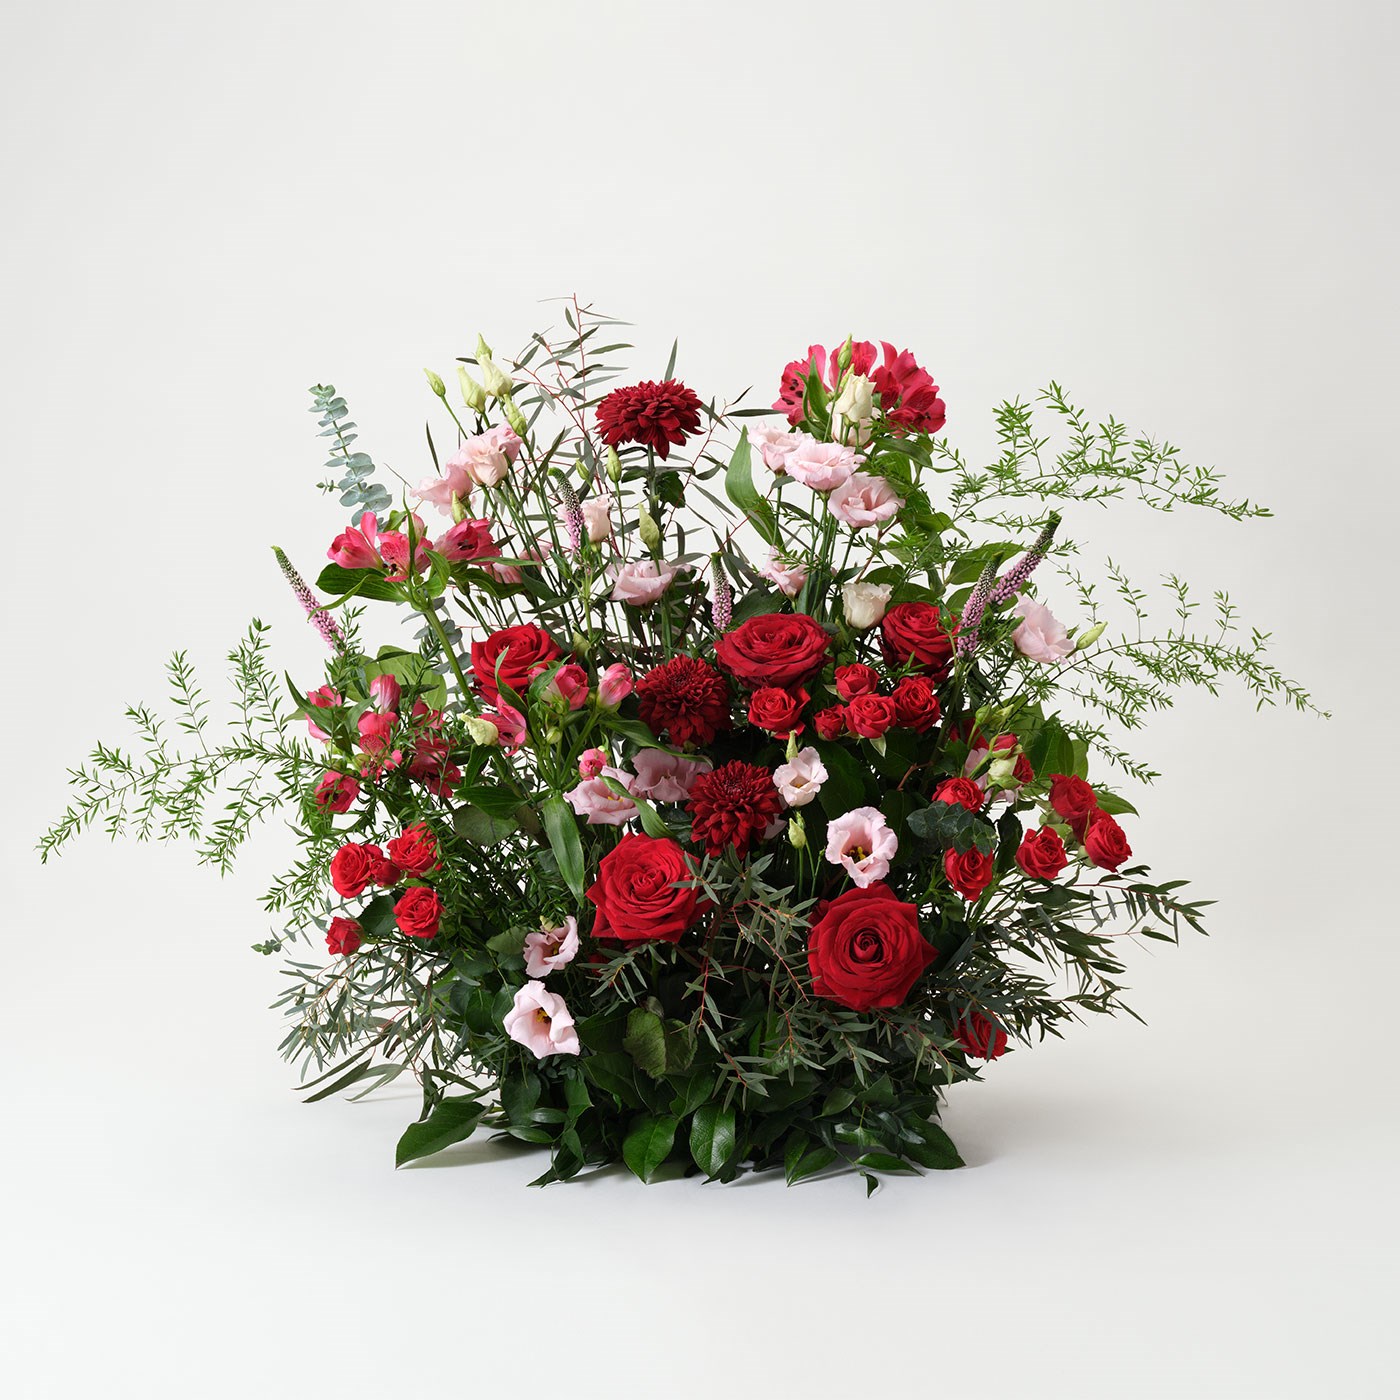 High funeral arrangement in red and pink